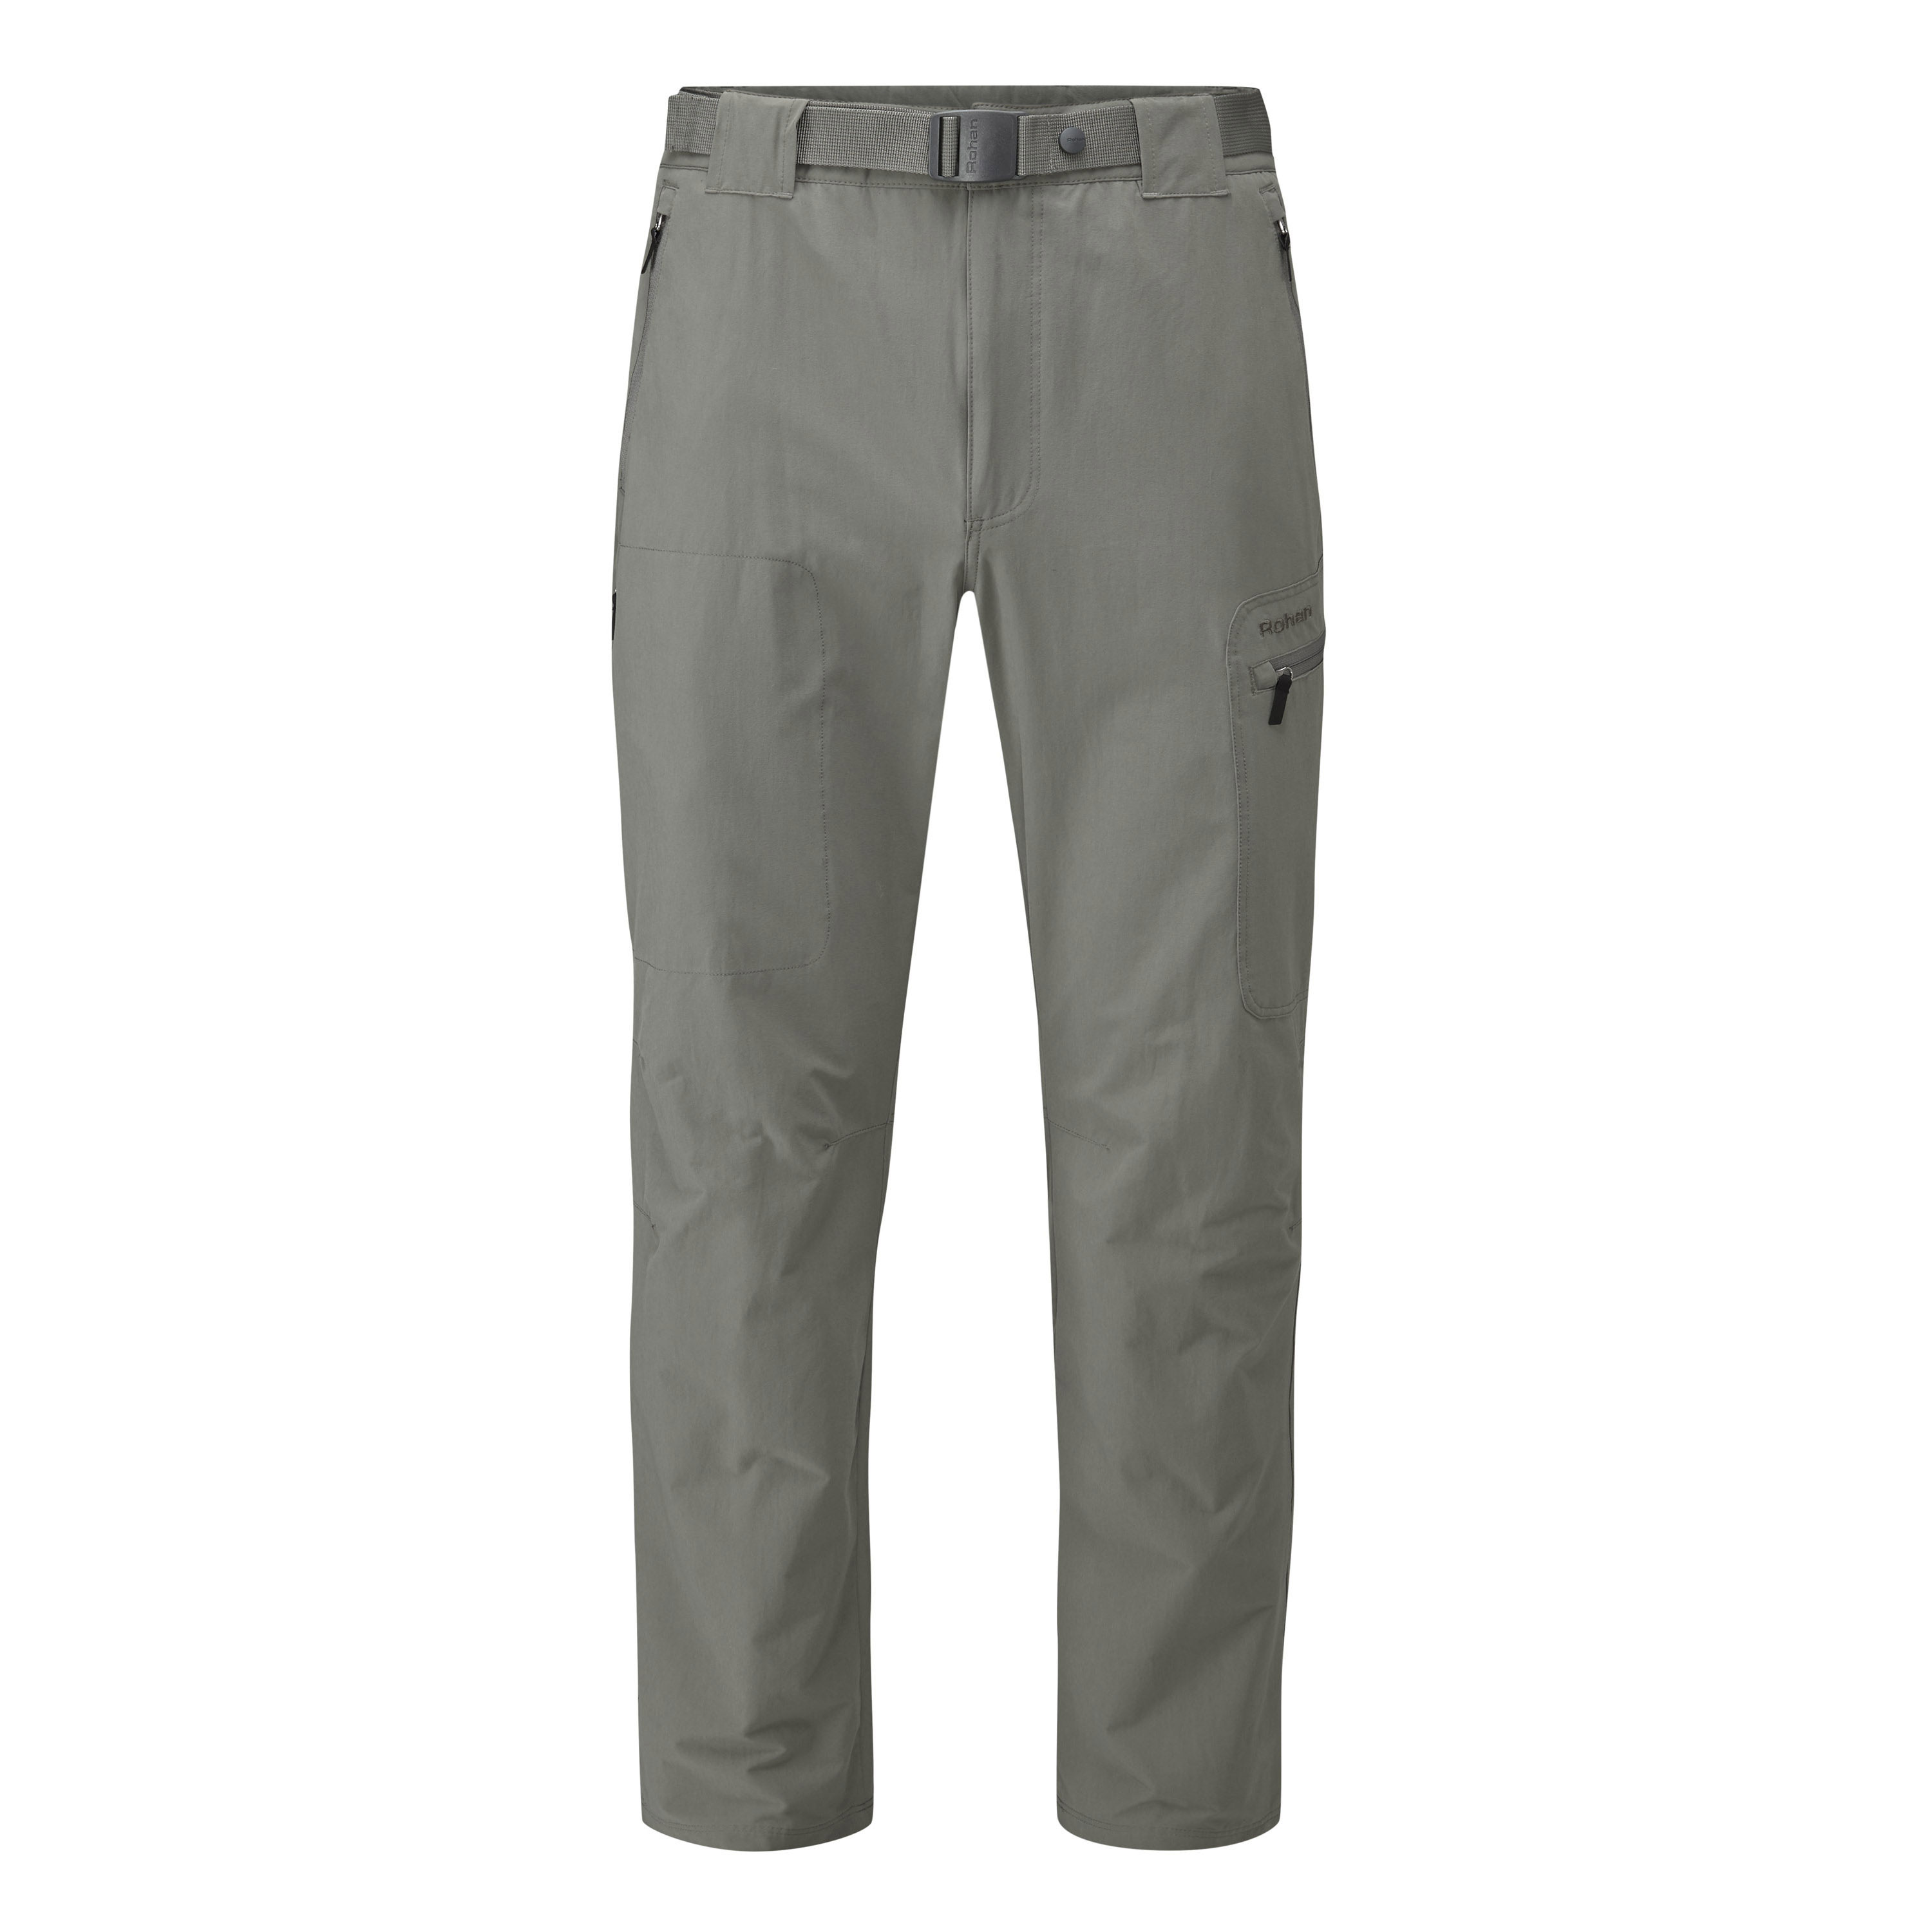 mens comfortable trousers